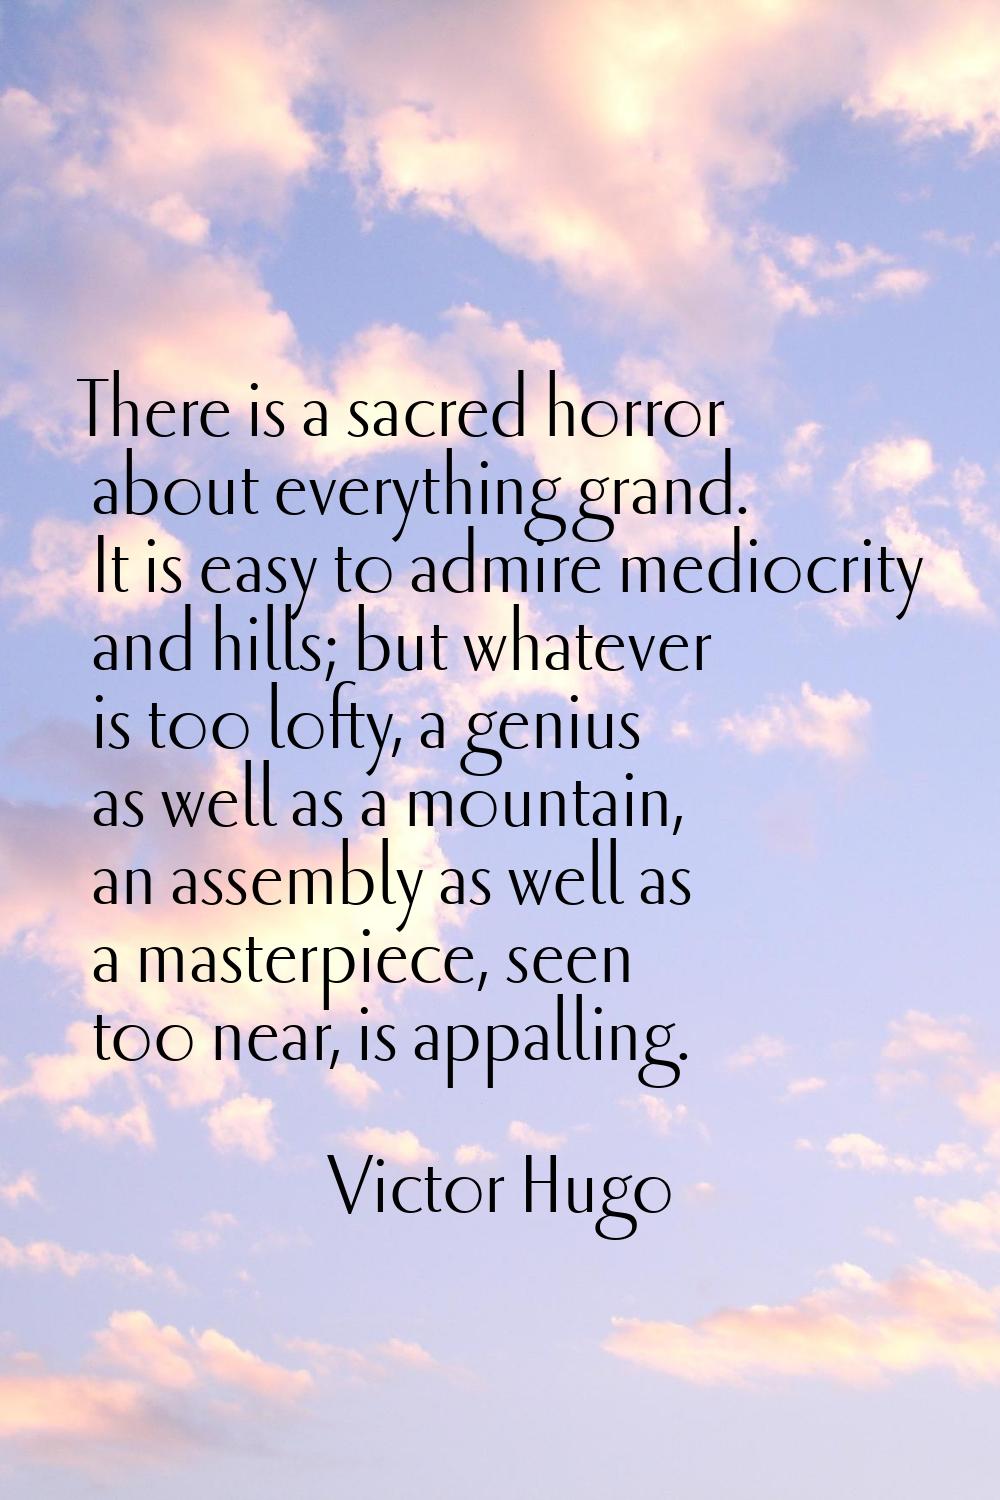 There is a sacred horror about everything grand. It is easy to admire mediocrity and hills; but wha